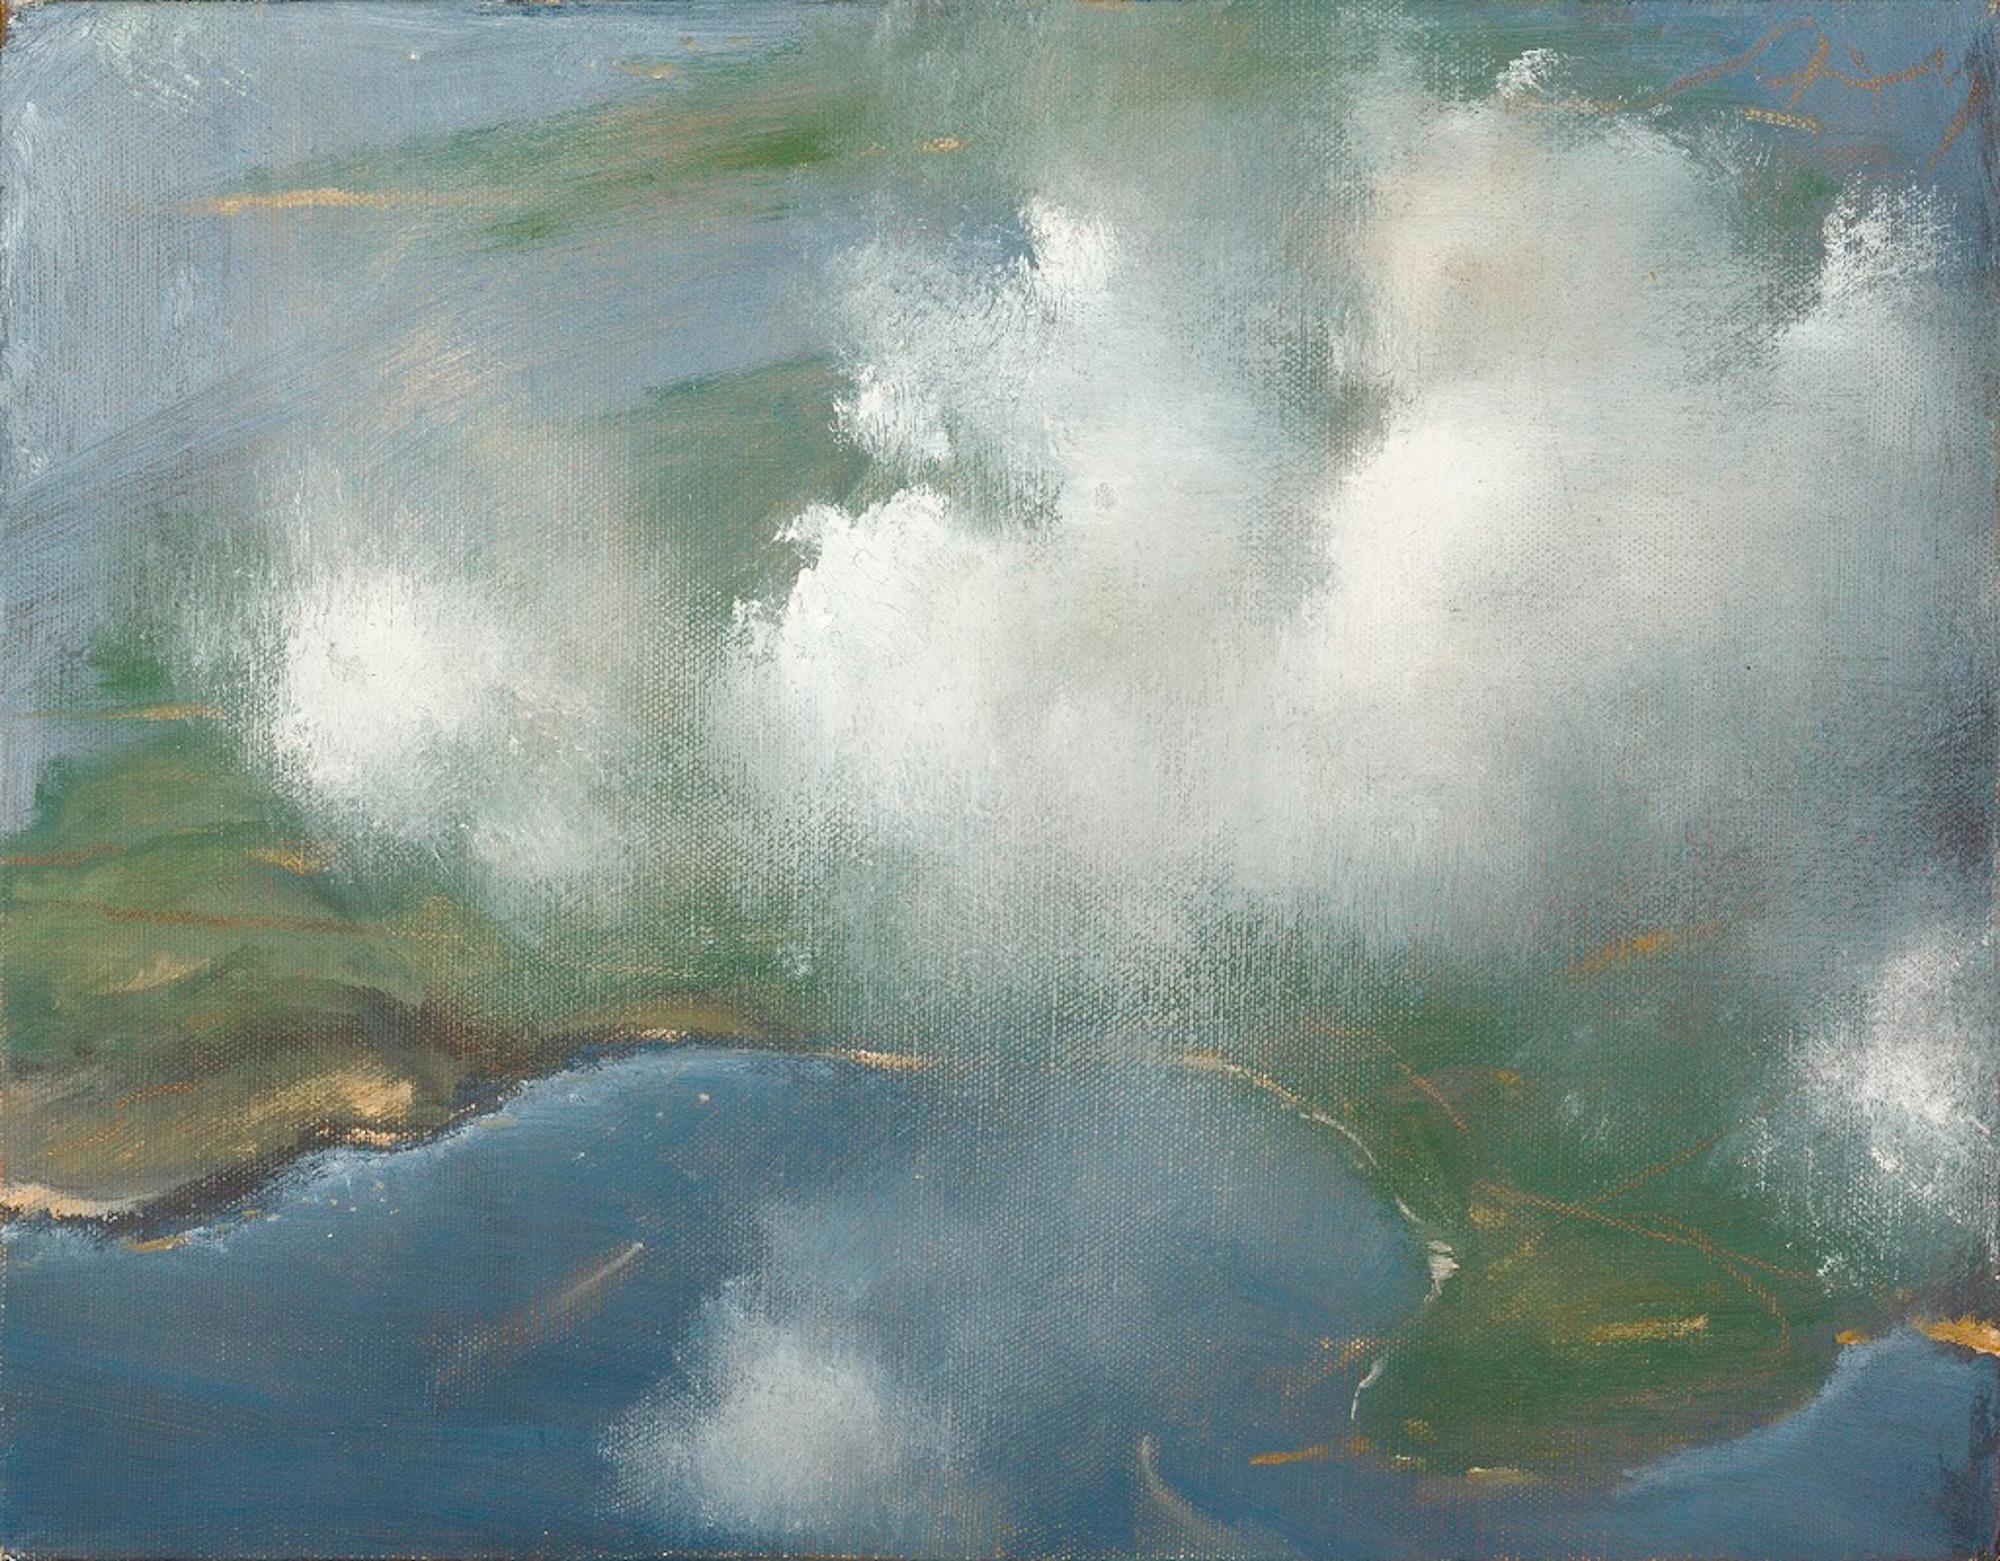 Clouds over Cuba is an original oil painting on canvas, realized around 1979 by the contemporary Cuban artist Julio Larraz (Havana, March 12, 1944)

On the back the label reporting: "Nohra Haime Gallery - New York".

This amazing contemporary